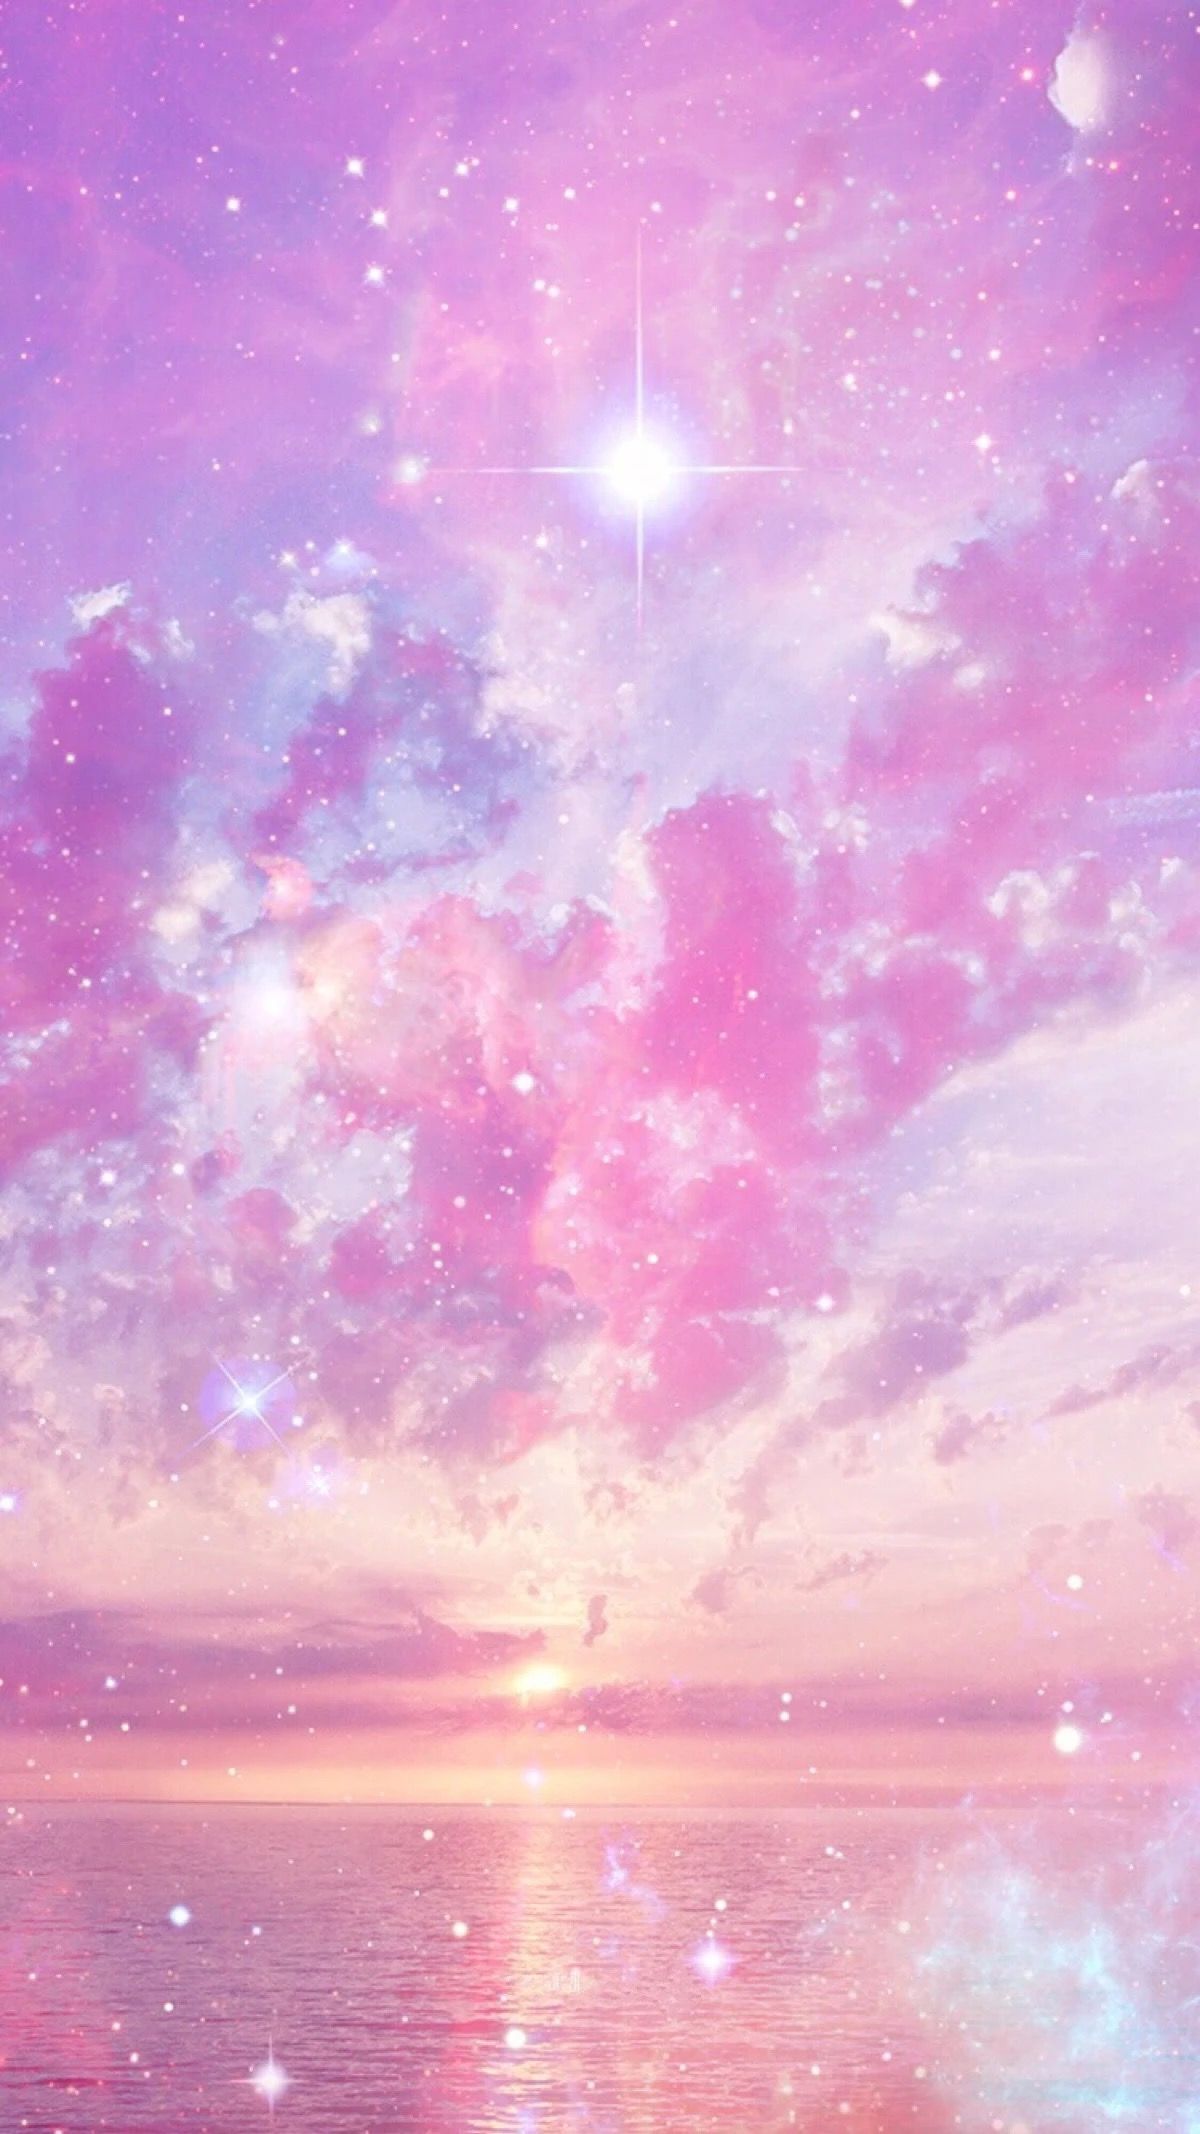 A pink sky with stars and clouds - Space